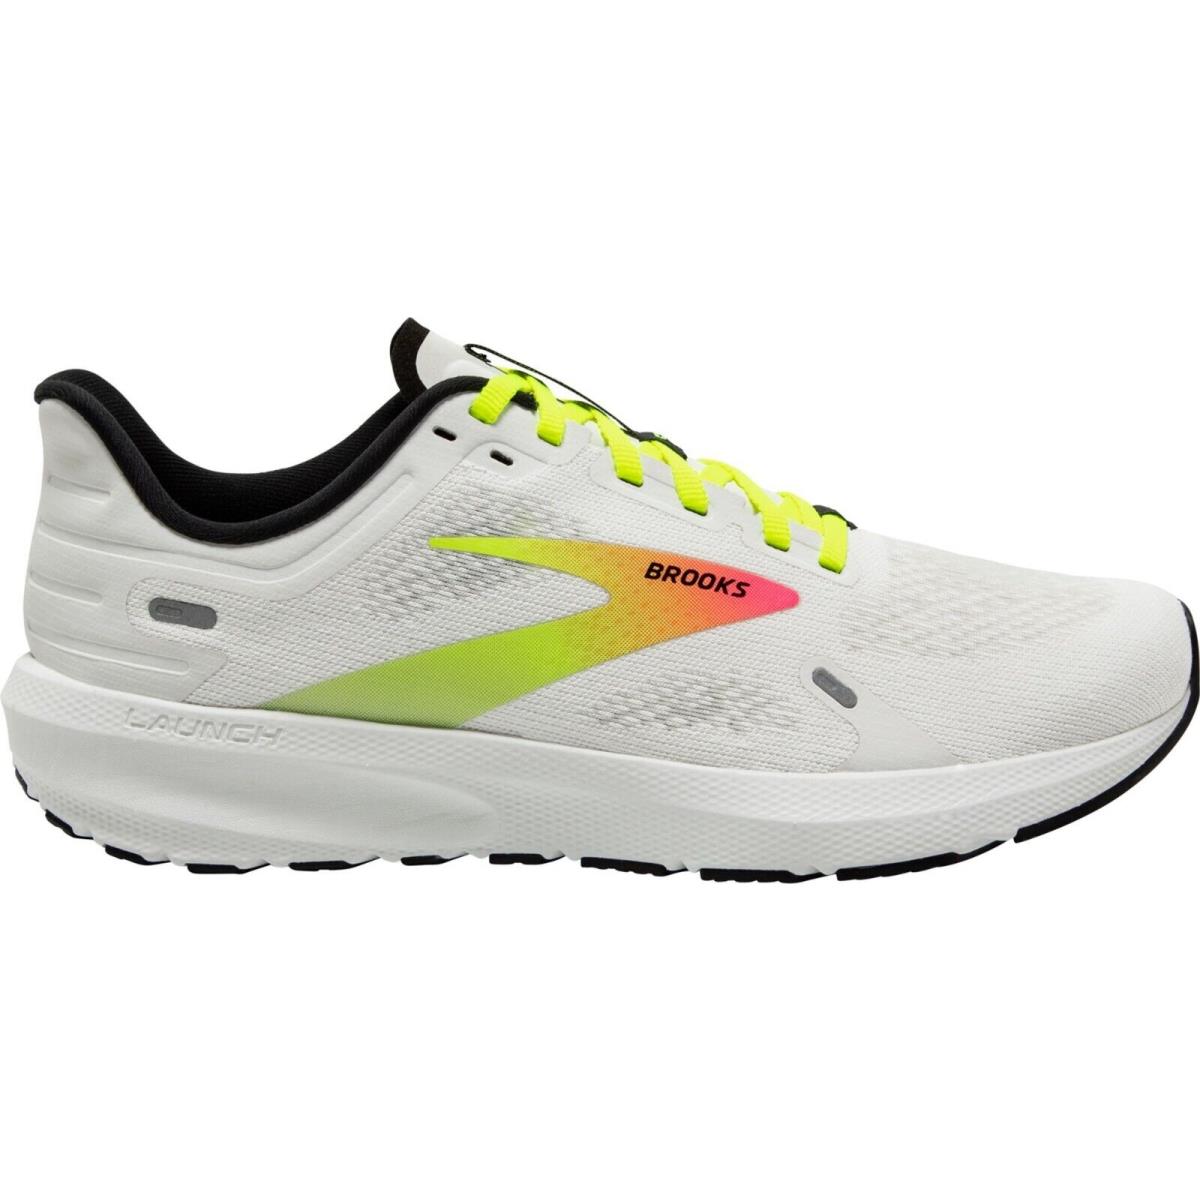 Brooks Launch 9 White Pink Nightlife Running Shoes Men`s Sizes 8-13